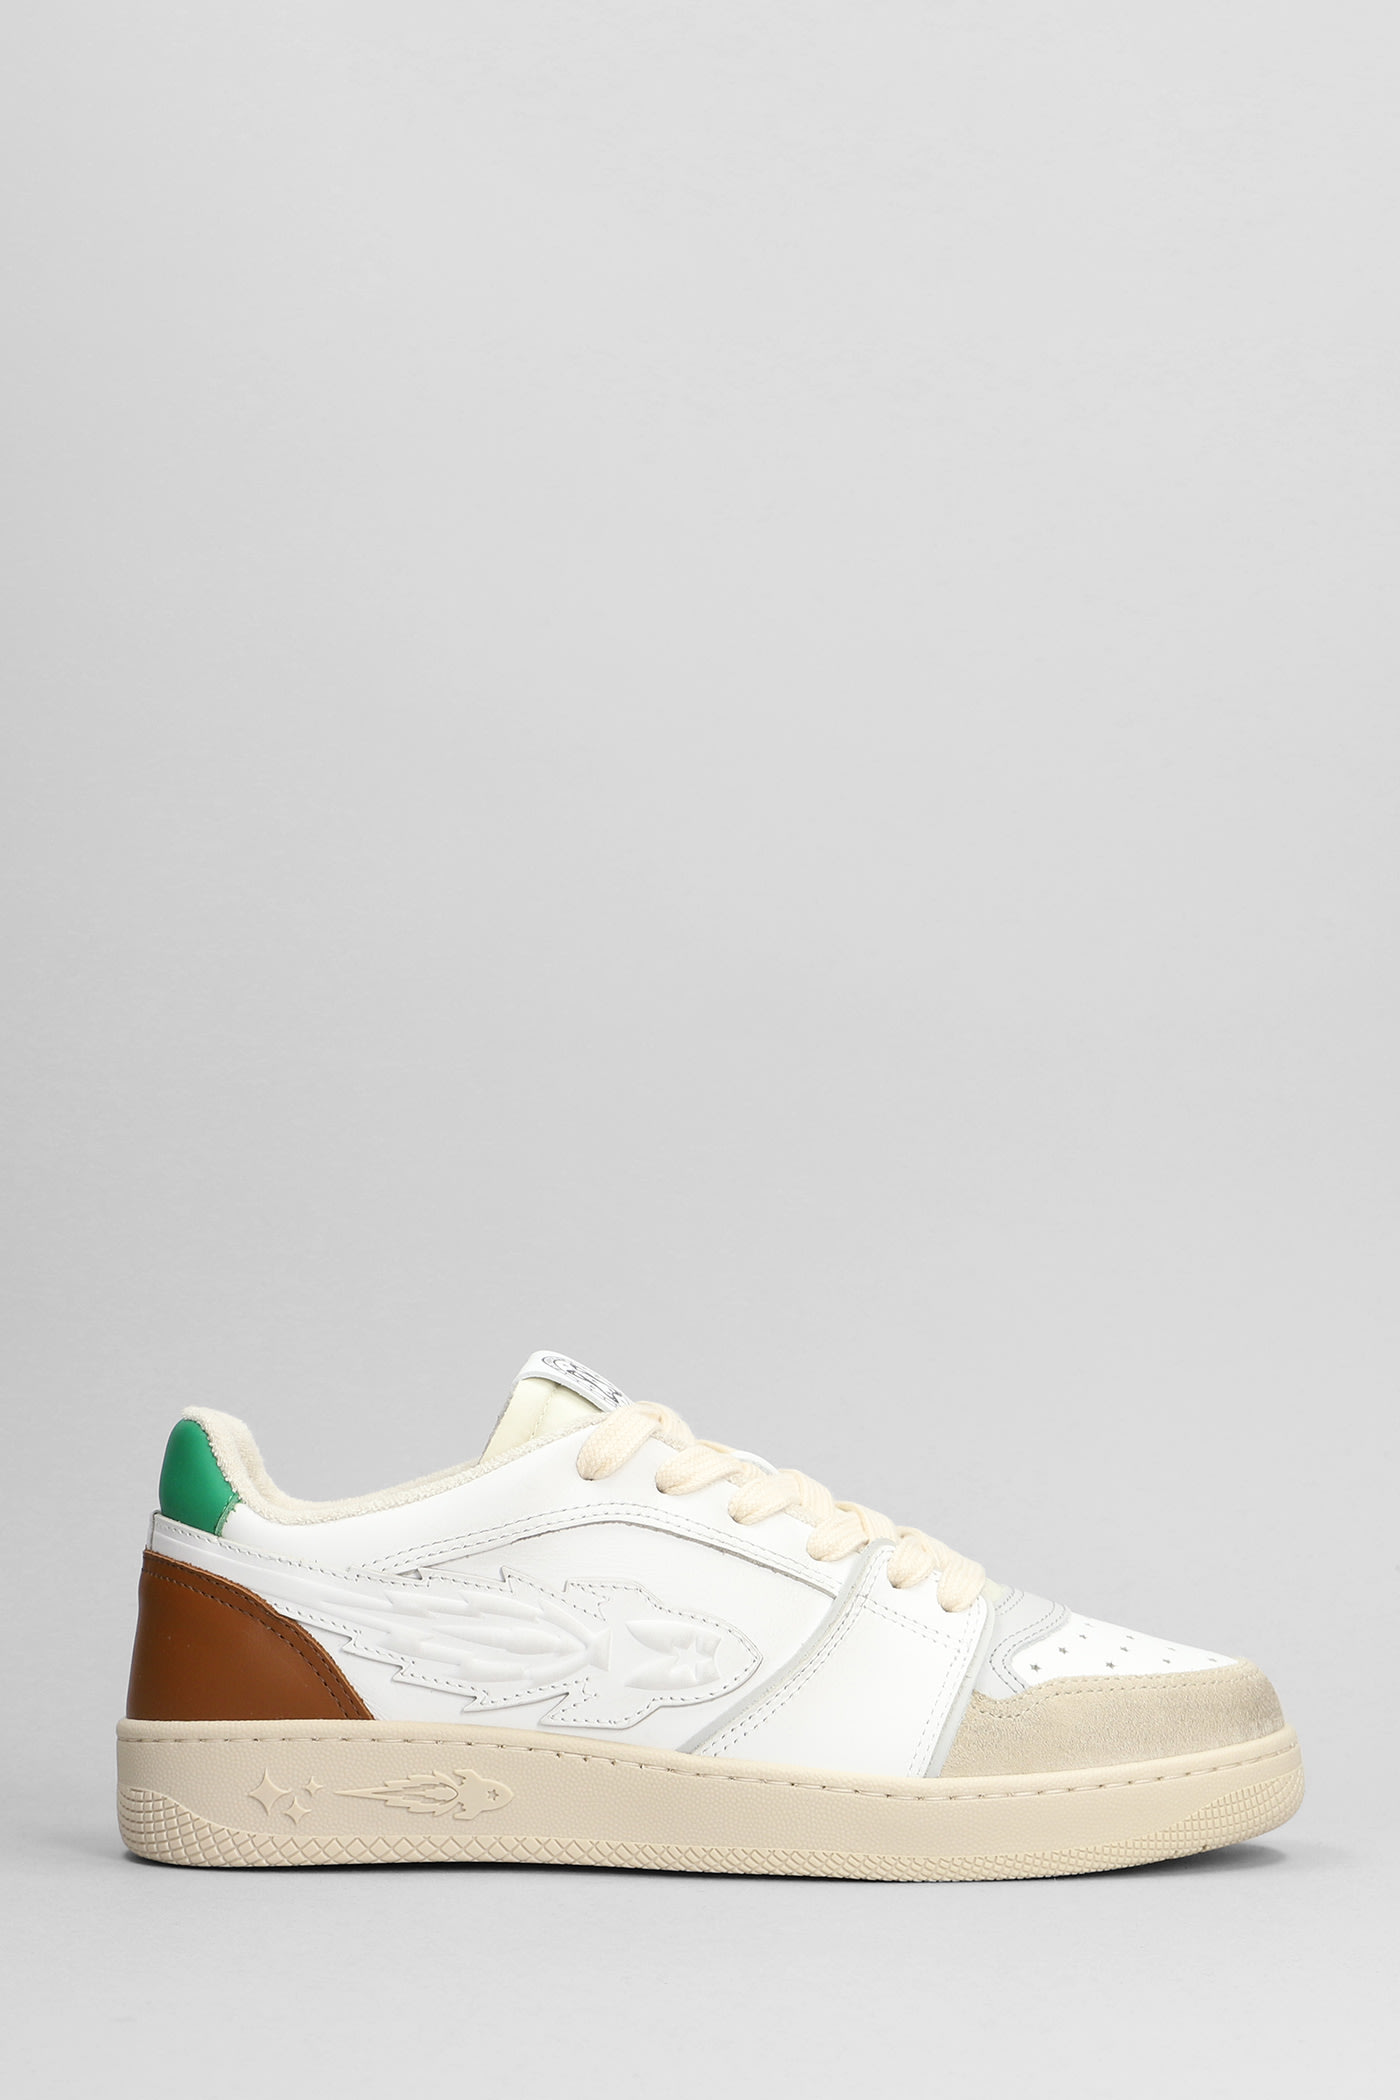 Enterprise Japan Trainers In White Suede And Leather